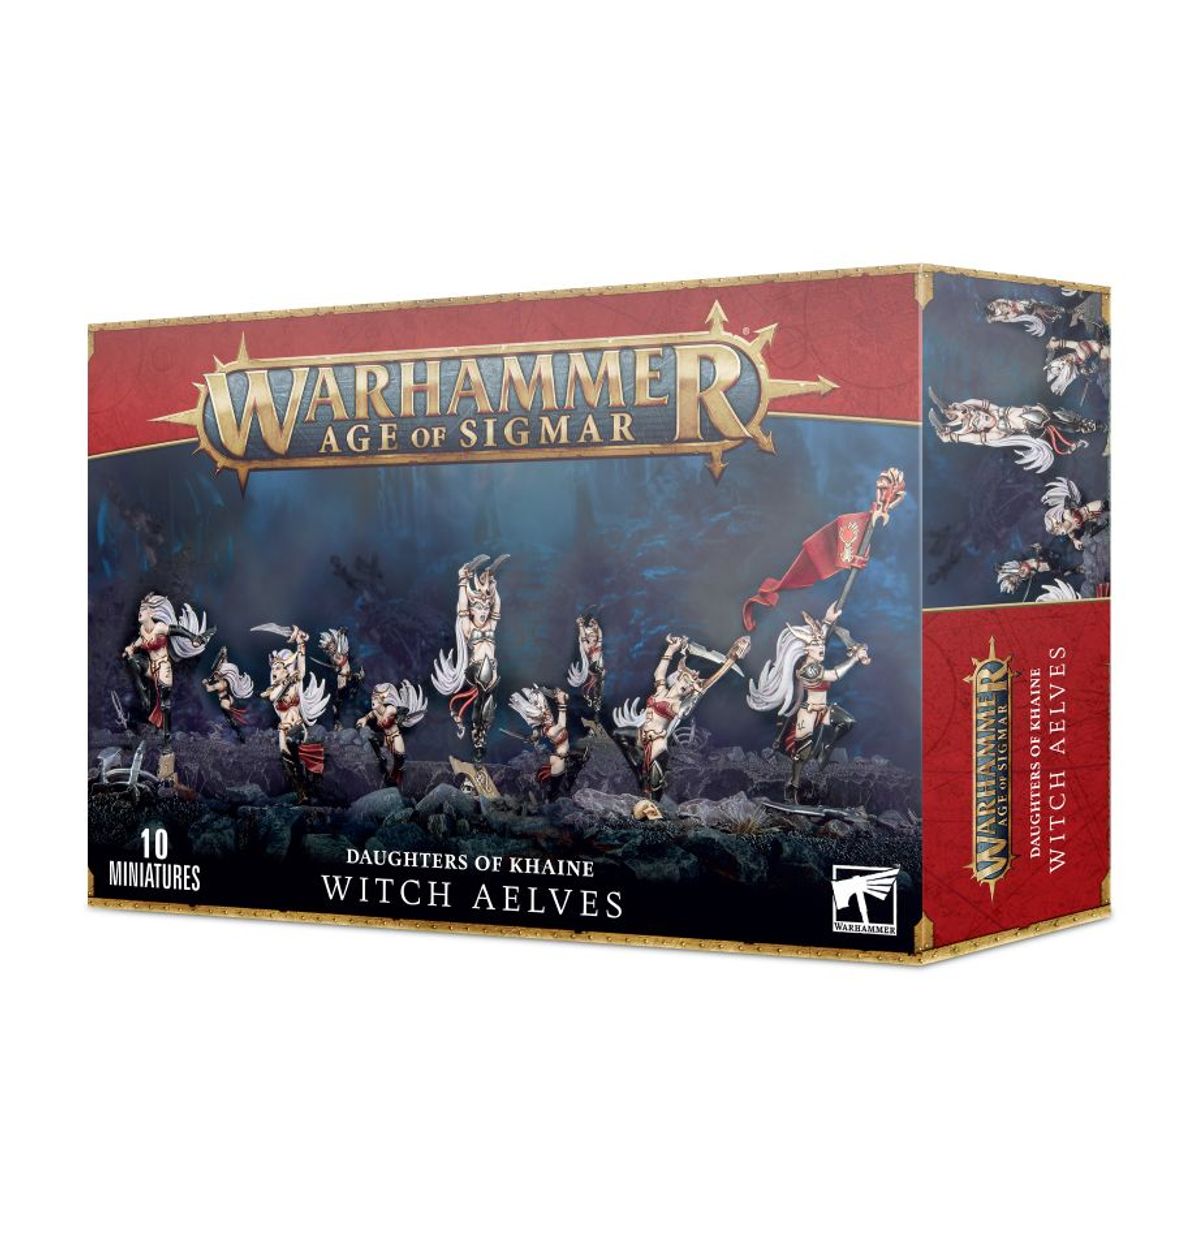 a box of warhammer age of sigmar miniatures